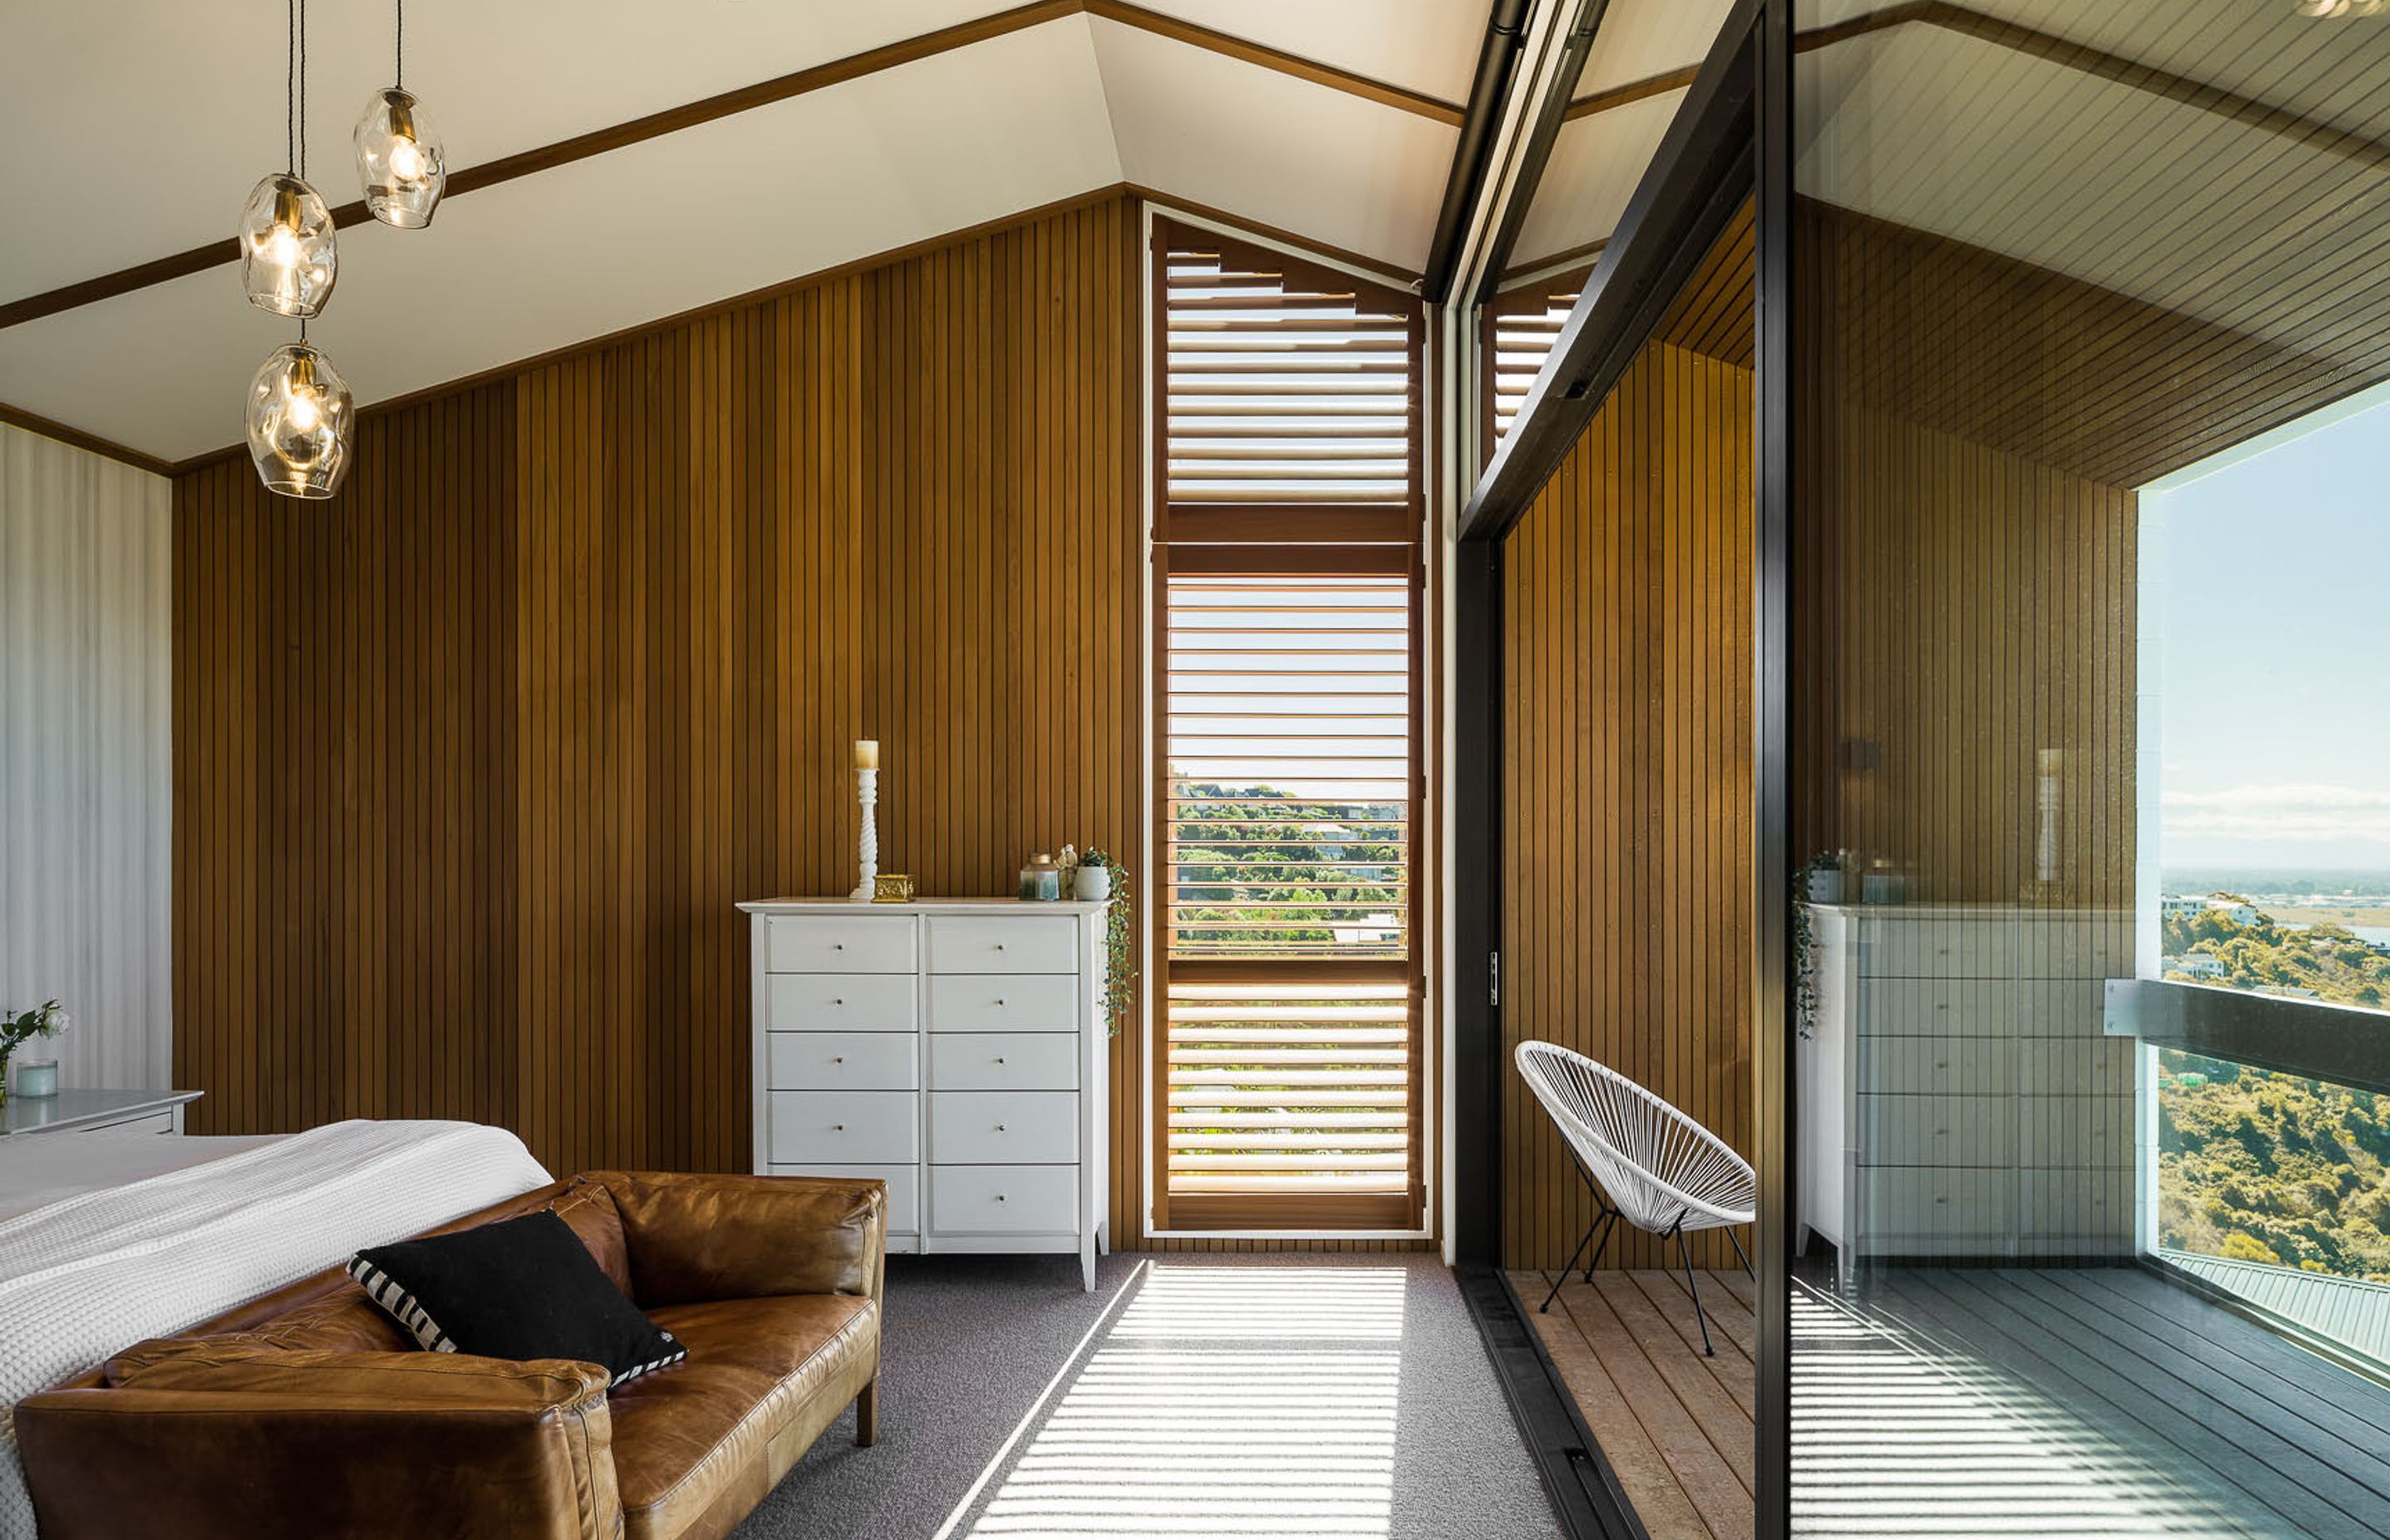 Shiplap vertical weatherboards have been used both internally and externally to impart a sense of the bedroom and verandah being connected spaces.